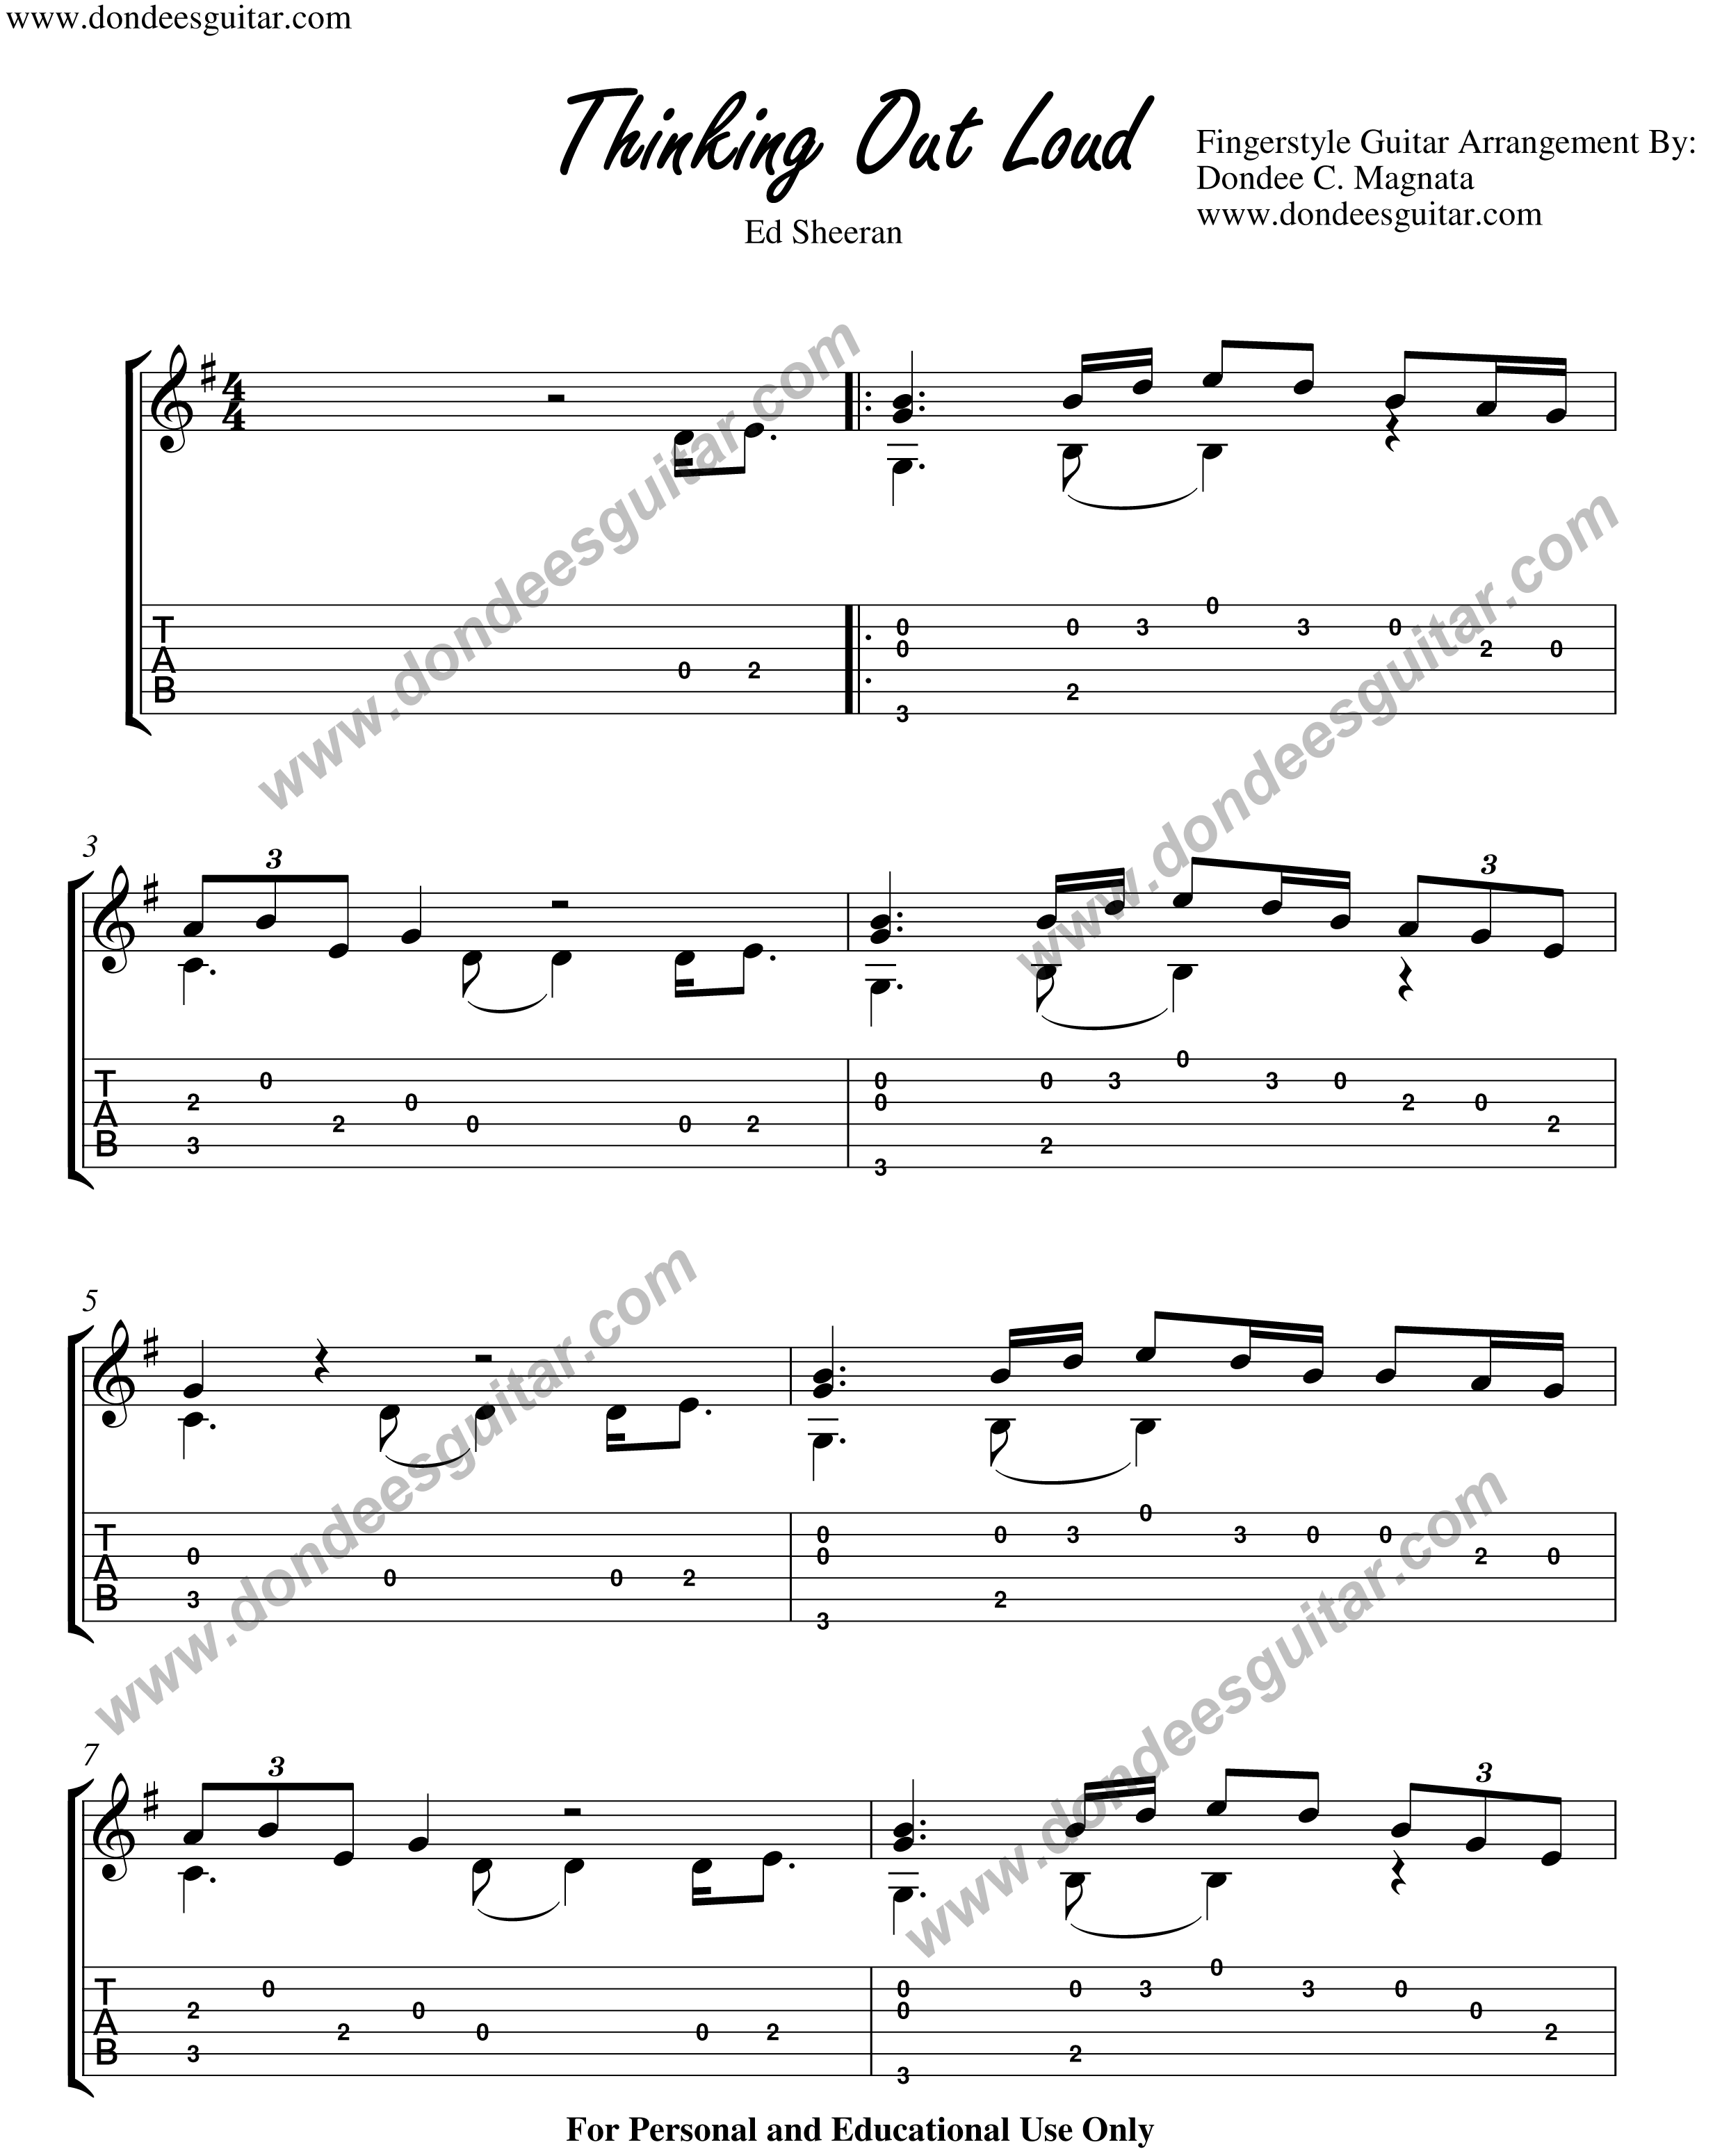 Thinking Out Loud Fingerstyle Tabs